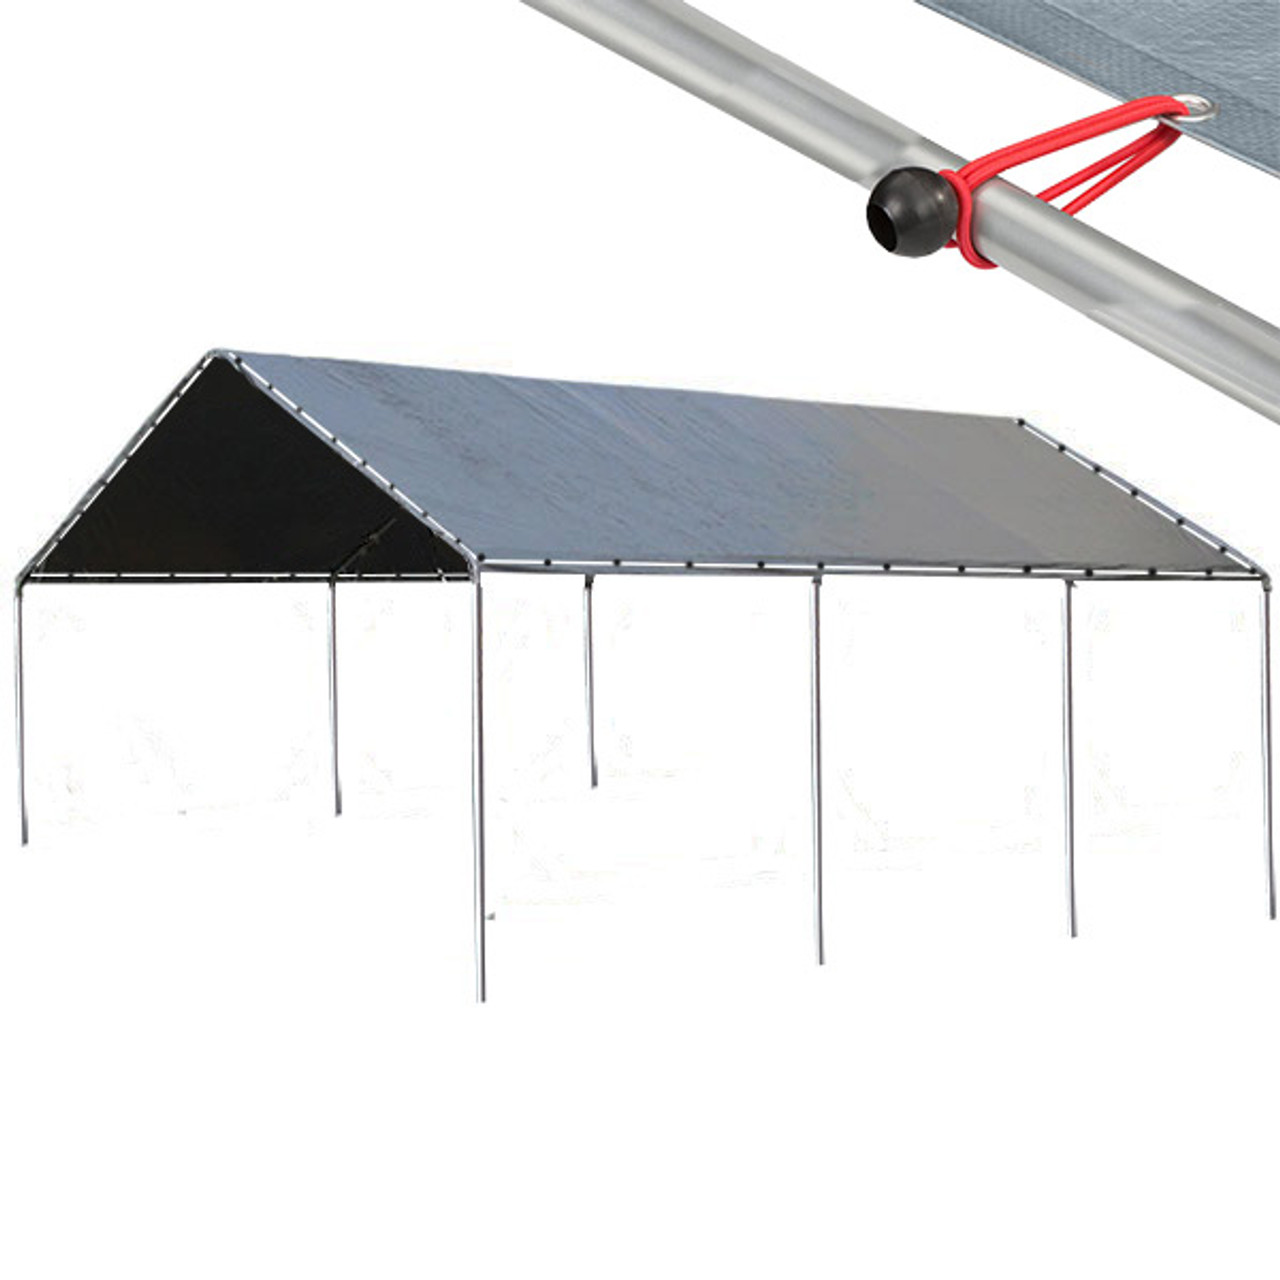 20' x 30' Frame Standard Canopy Replacement Cover(Fits 18 X 30 Frames)